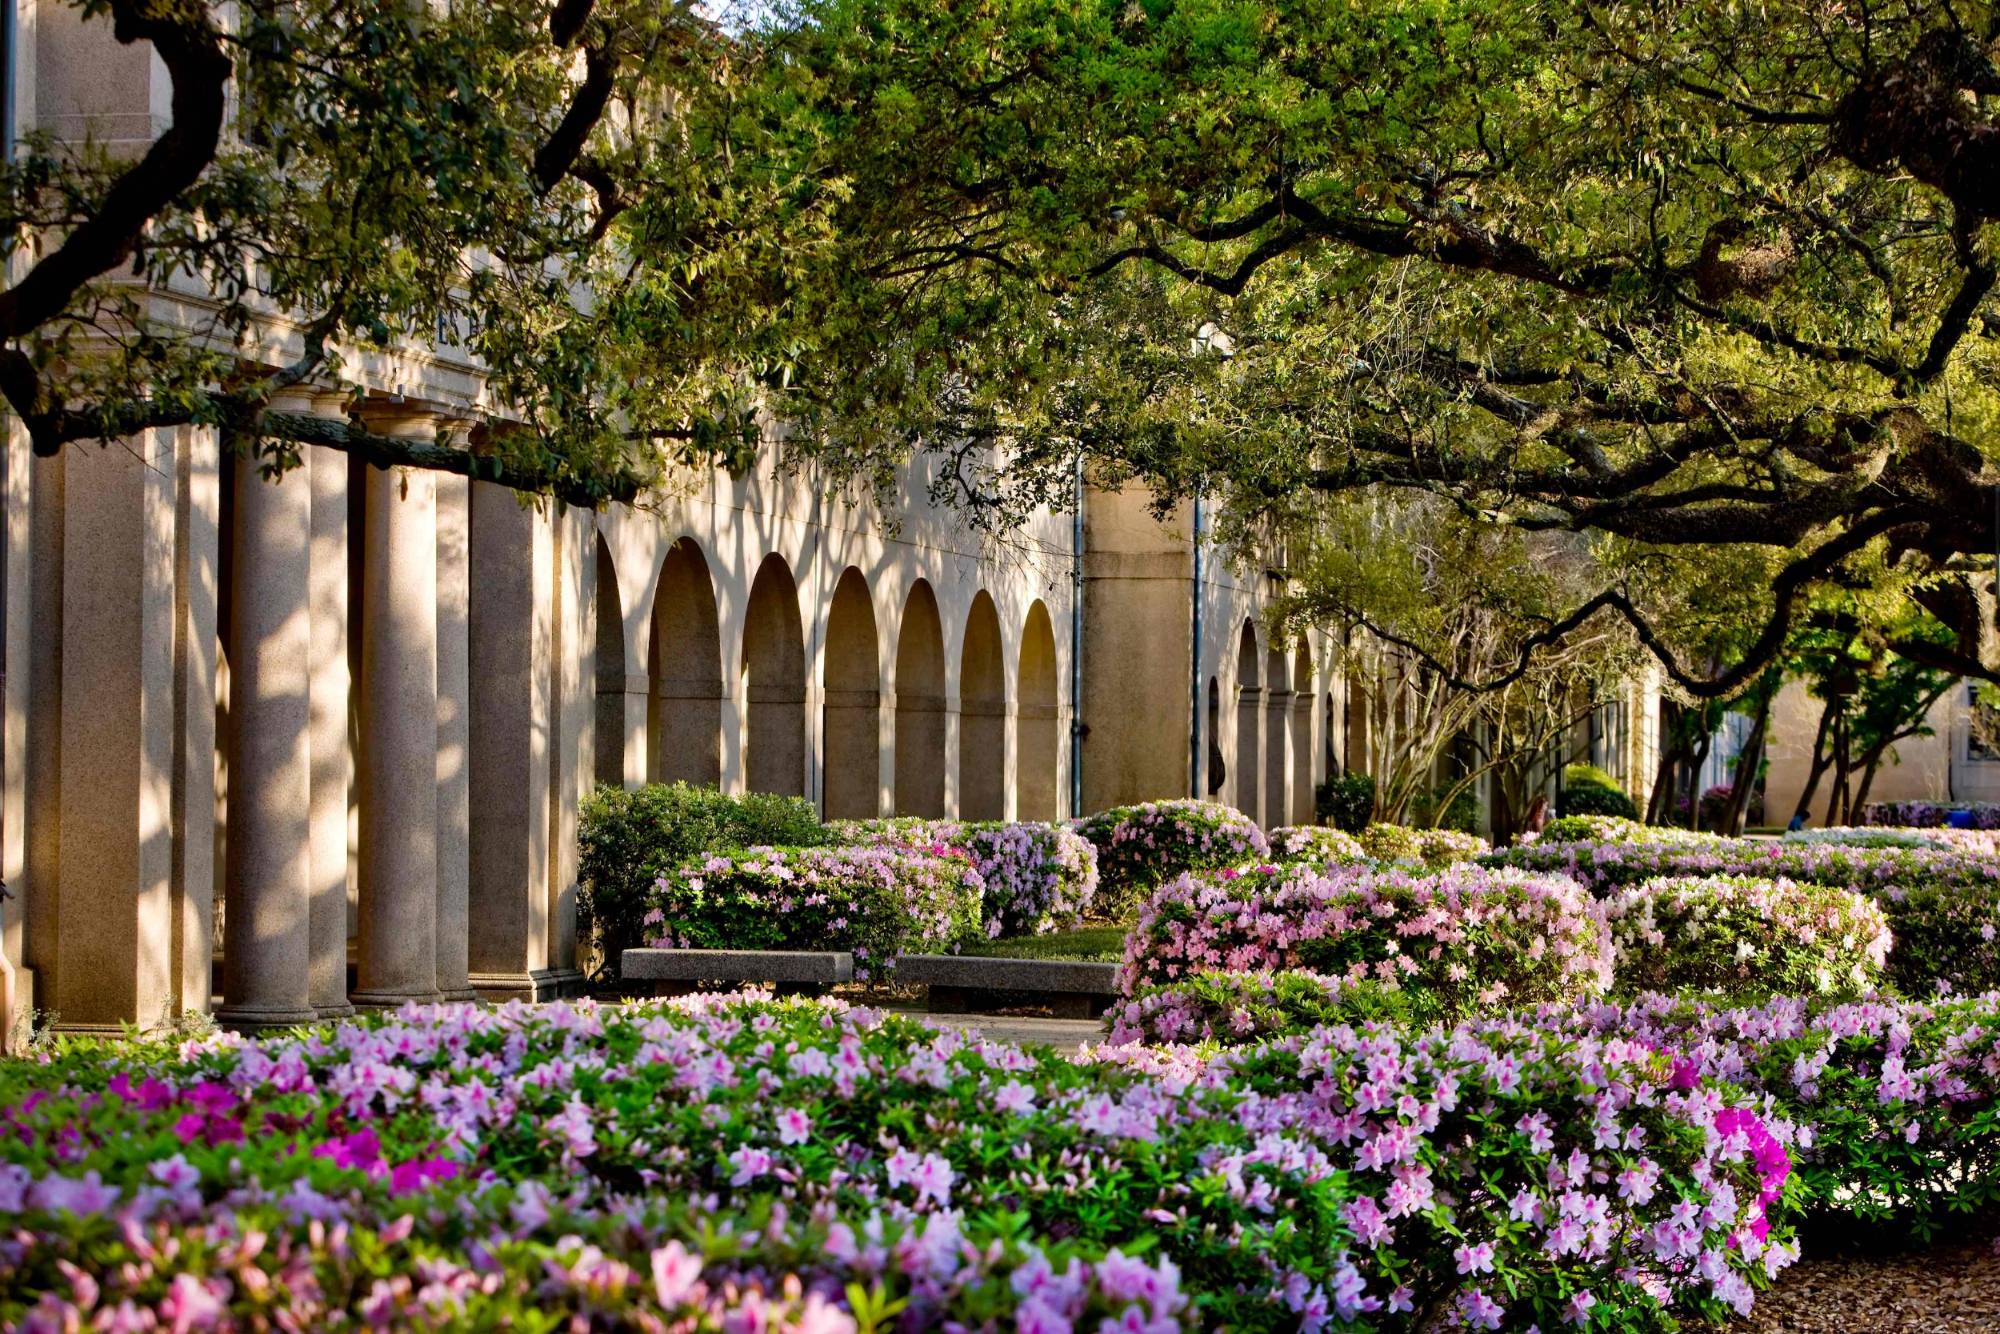 Azalea blooms in the quad under the arches.